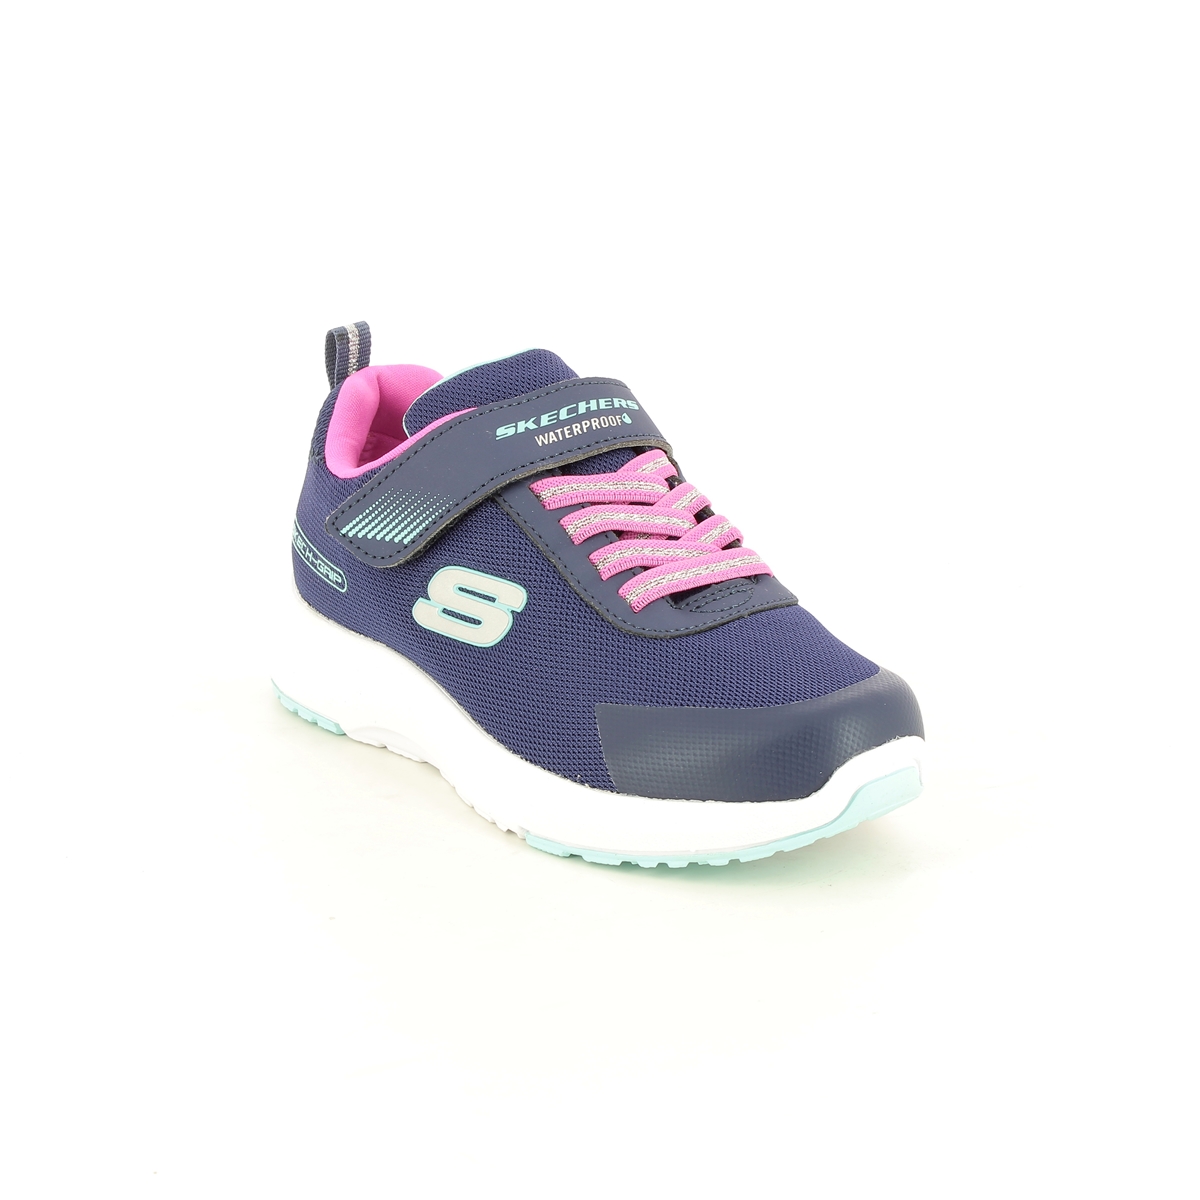 Skechers Dynamic Tex Navy Pink Kids Girls Trainers 302425L In Size 29 In Plain Navy Pink For kids